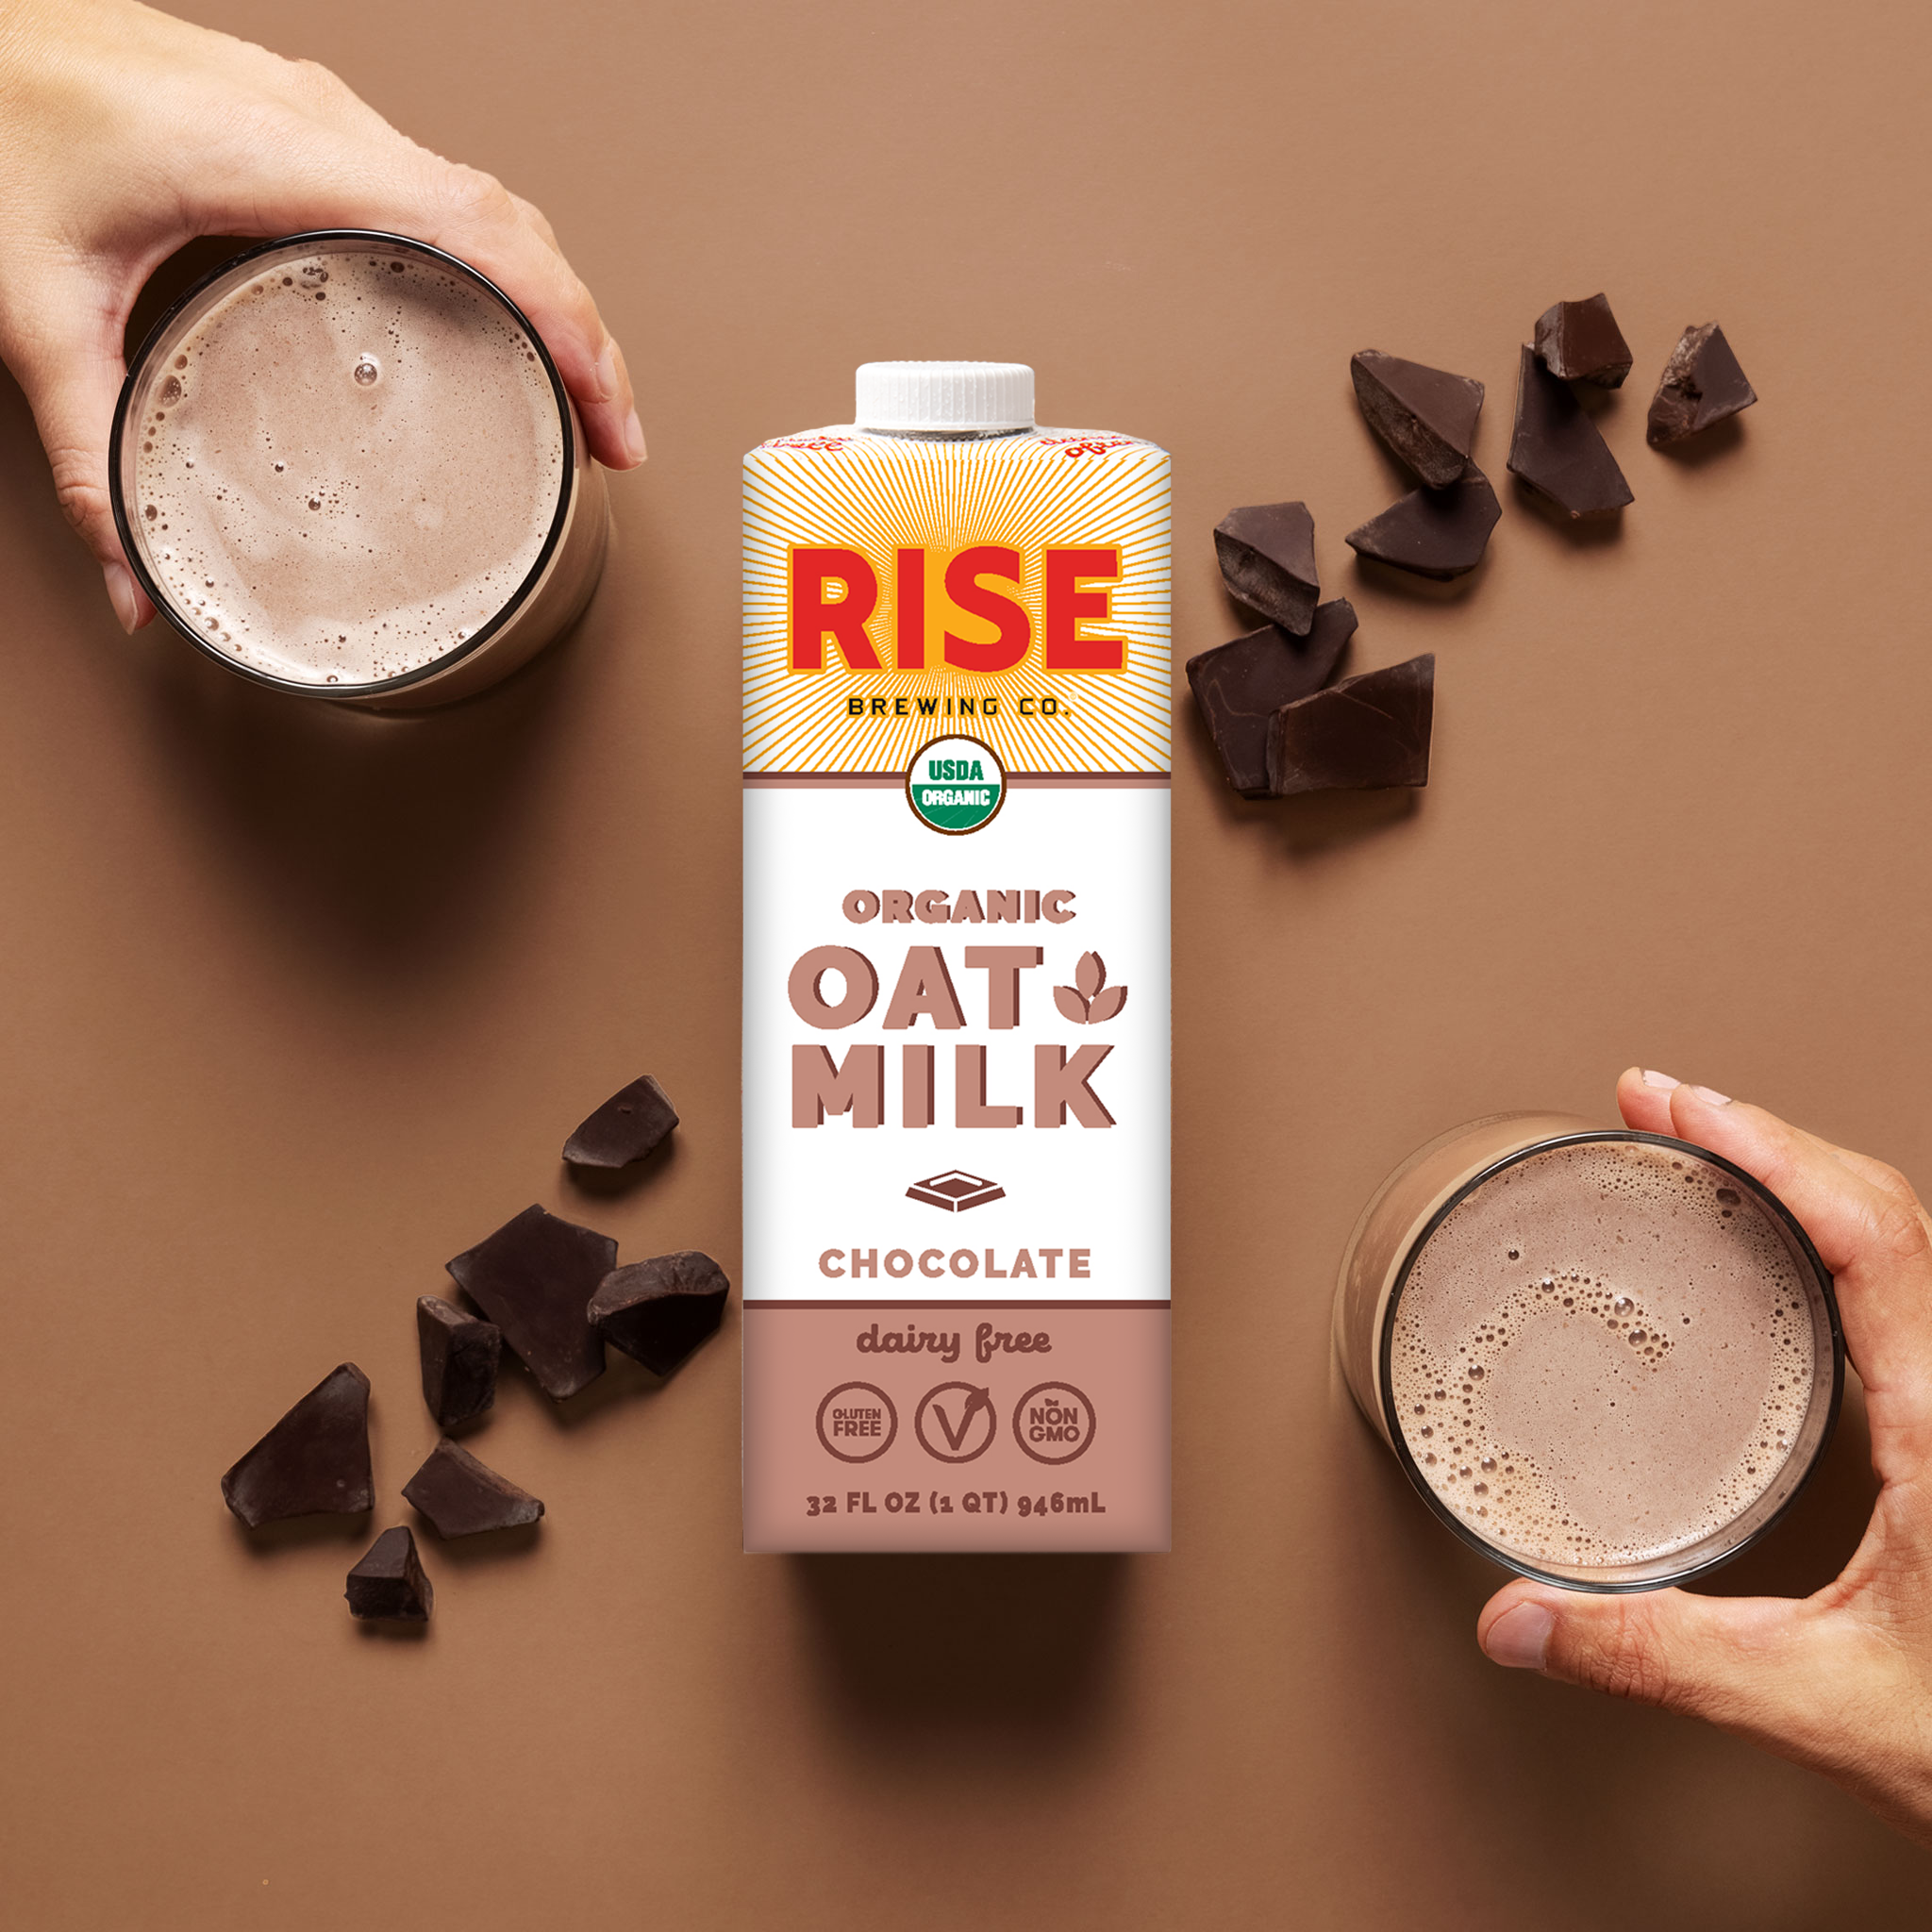 RISE Brewing co. Chocolate Oat Milk Overhead